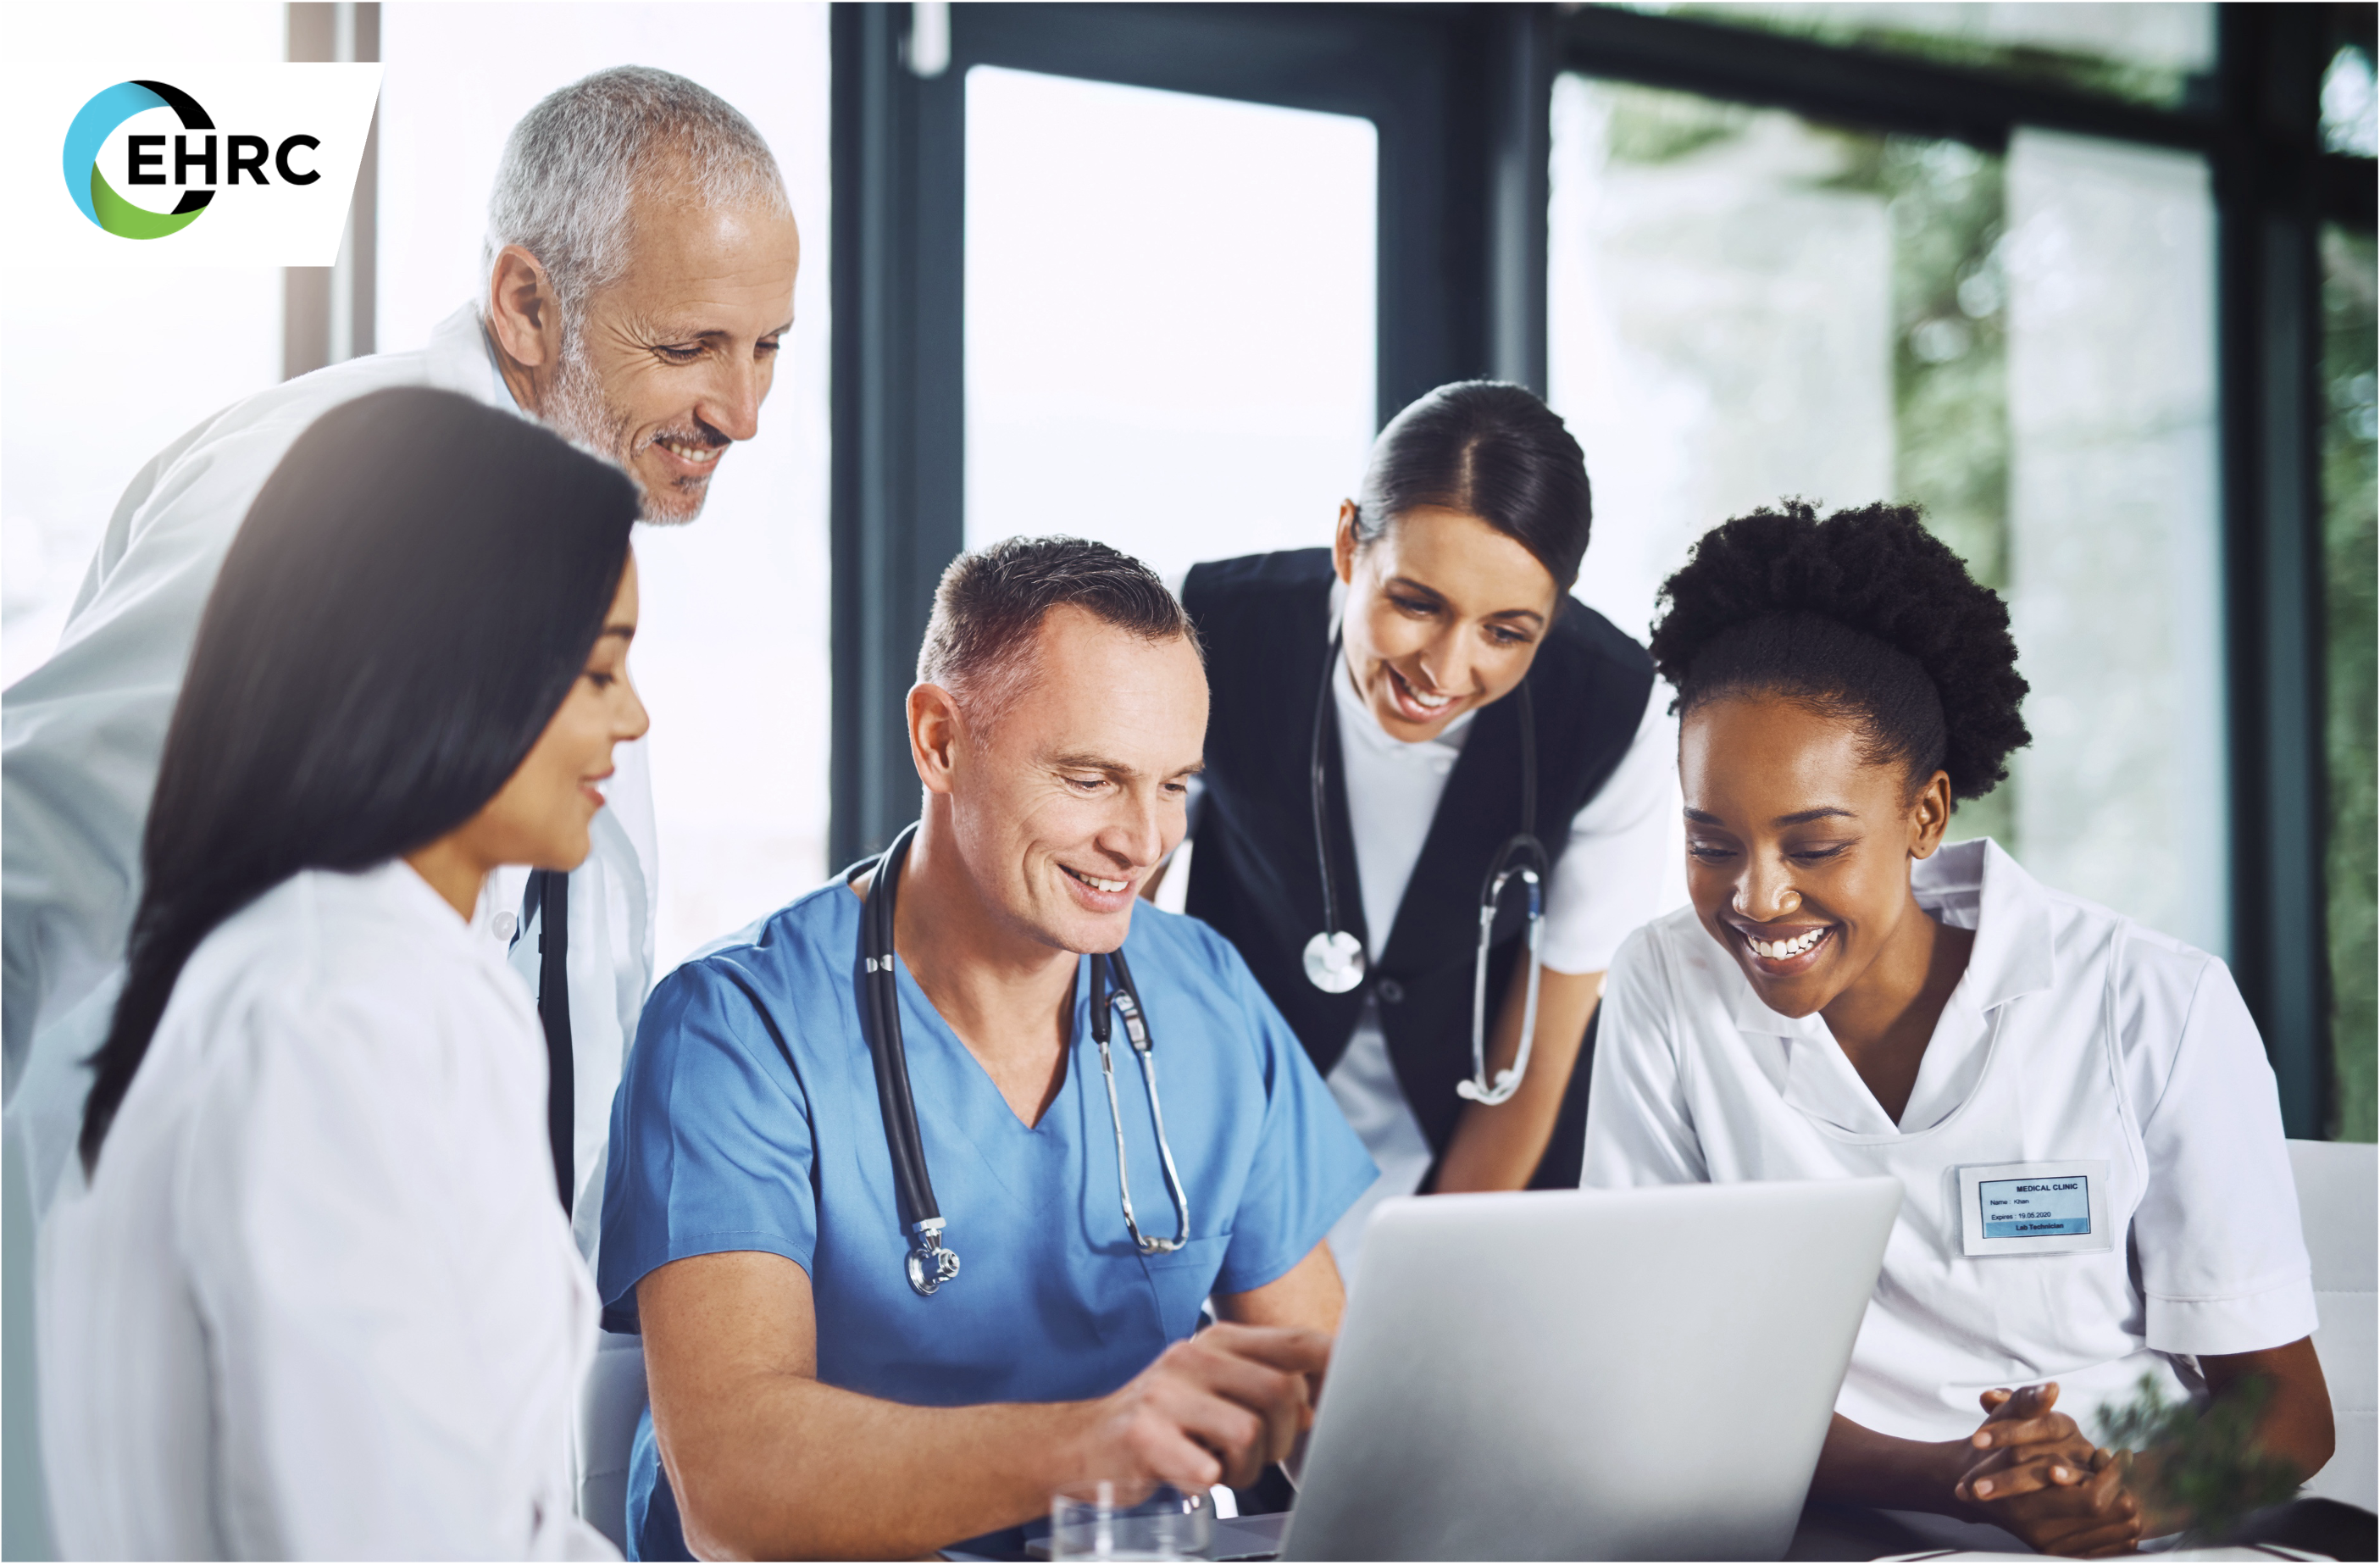 eLearning Part 4: How EHR Concepts Redefines eLearning